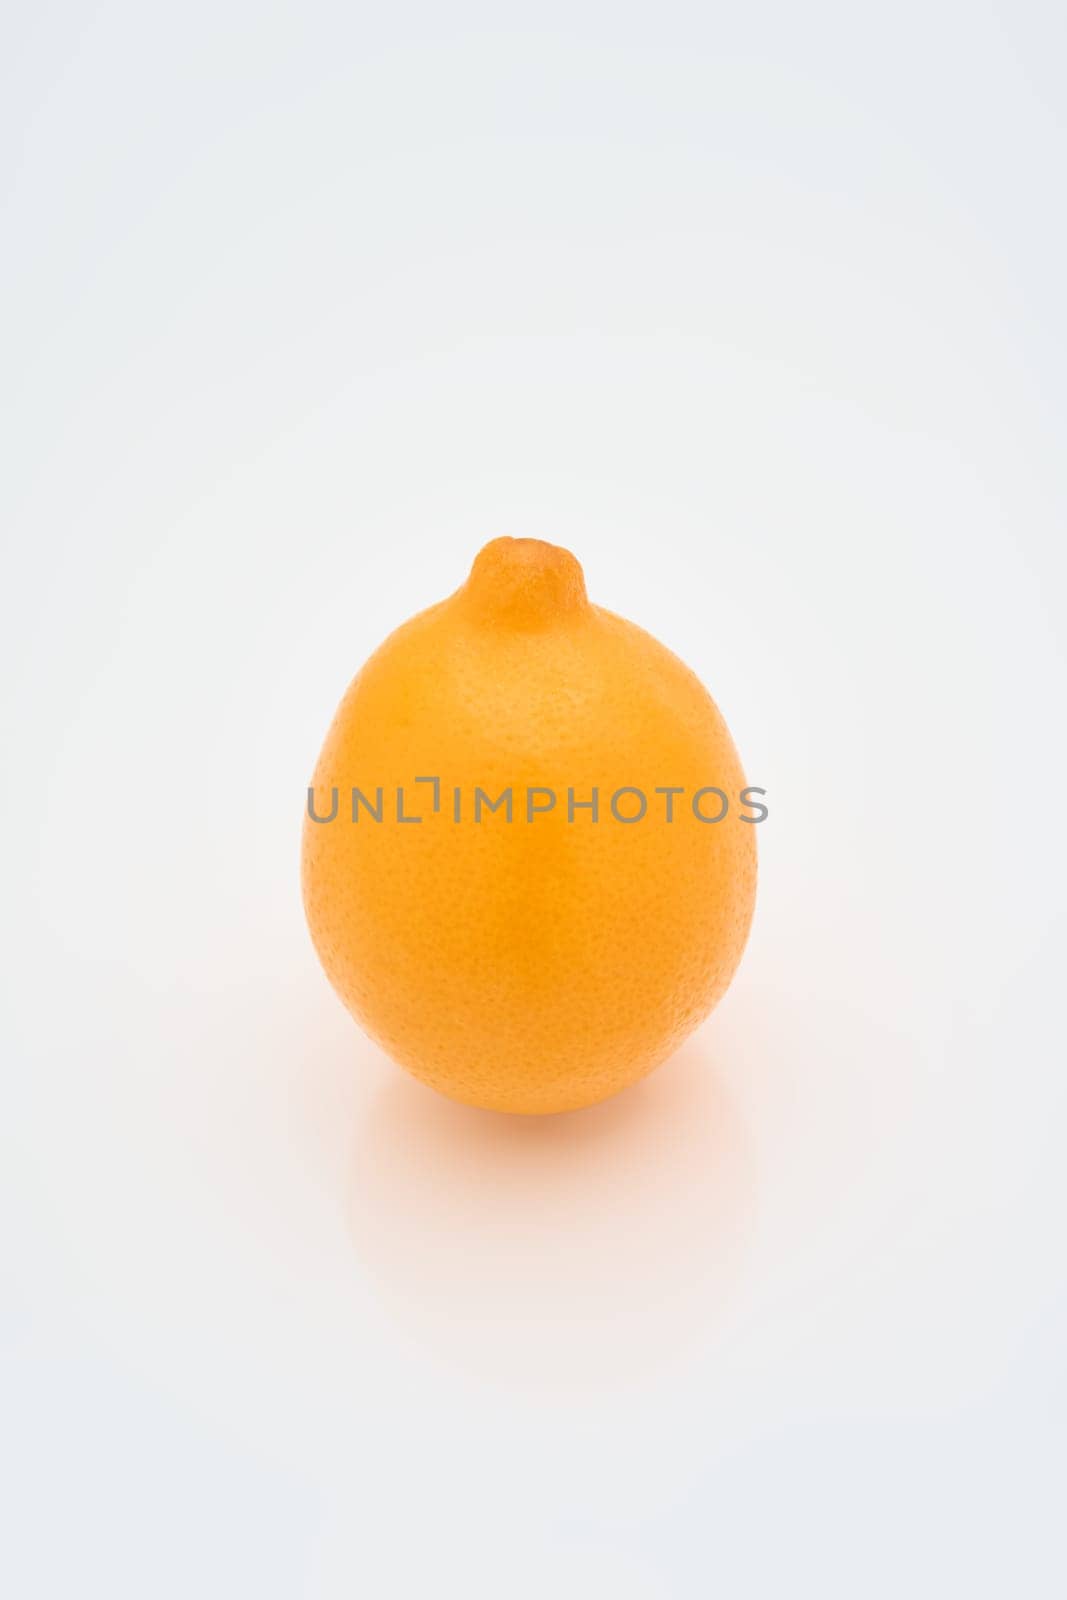 juicy bright lemon on a white background with reflection on the surface by vladimirdrozdin